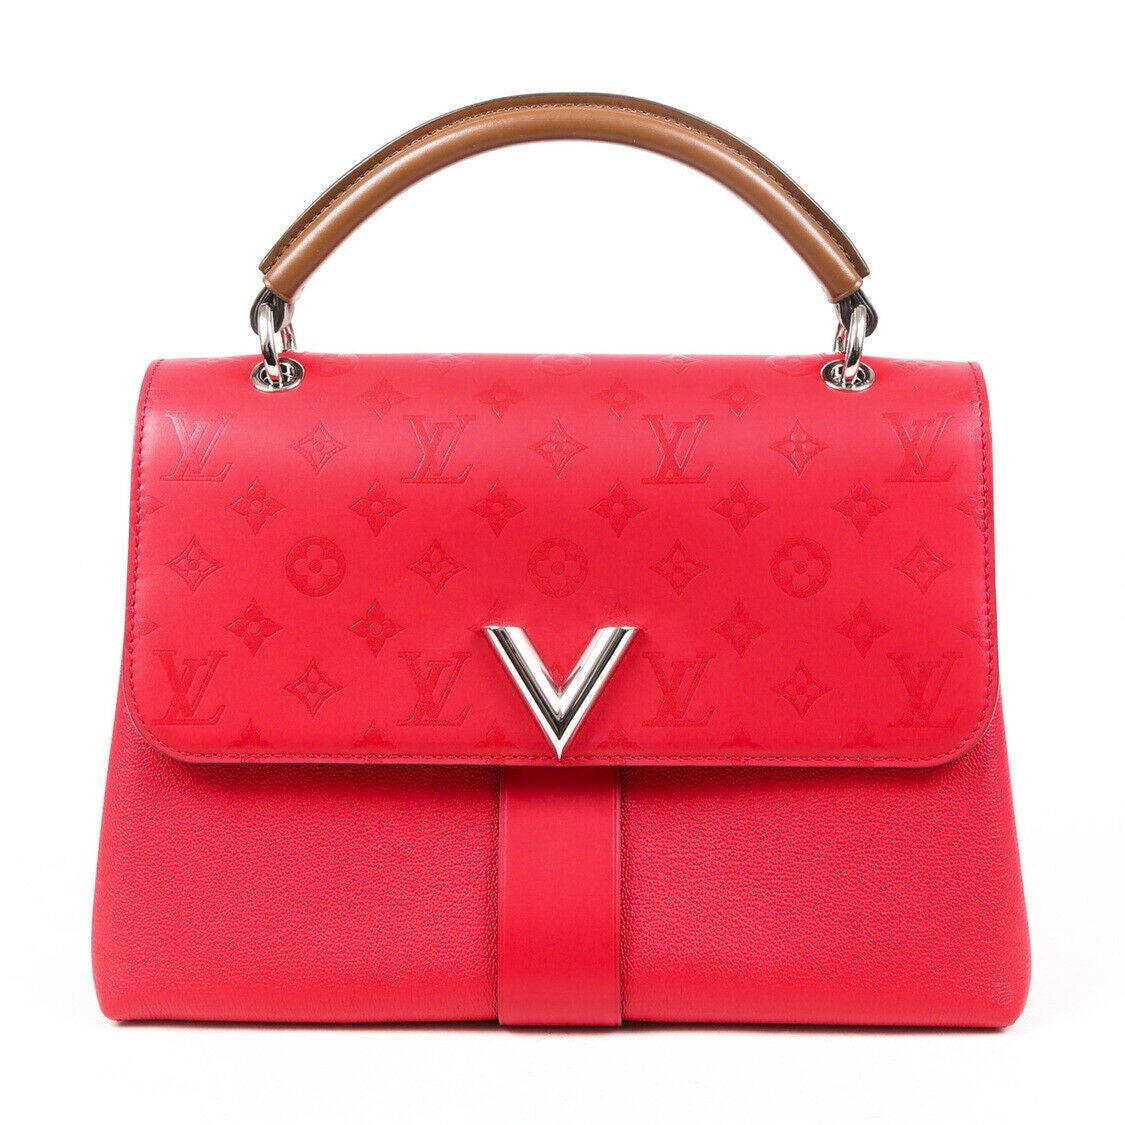 Louis Vuitton Bag Very One Red Monogram Leather